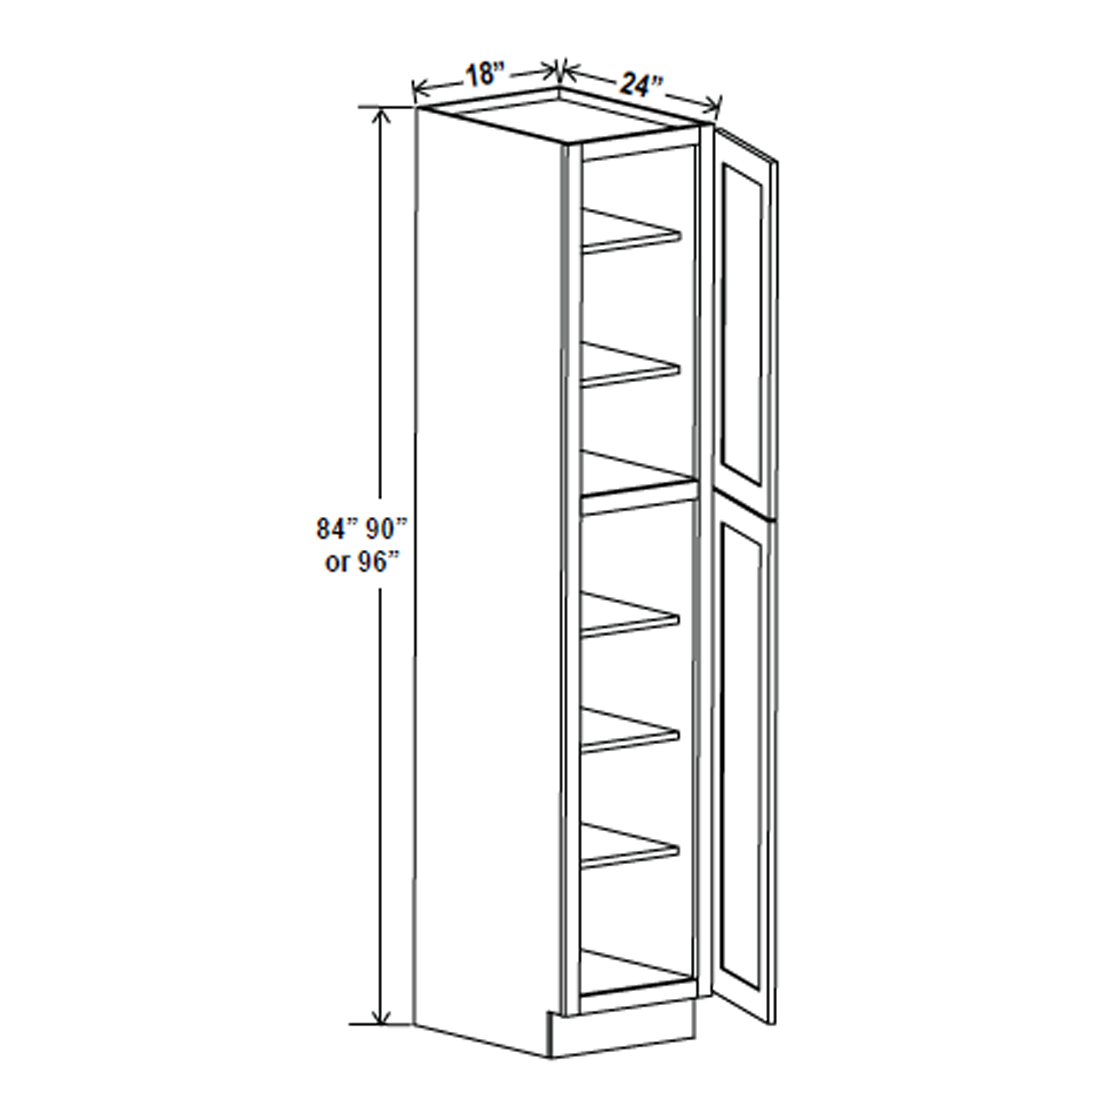 Wall Pantry Cabinet - 18W x 84H x 24D - Aria Shaker Espresso